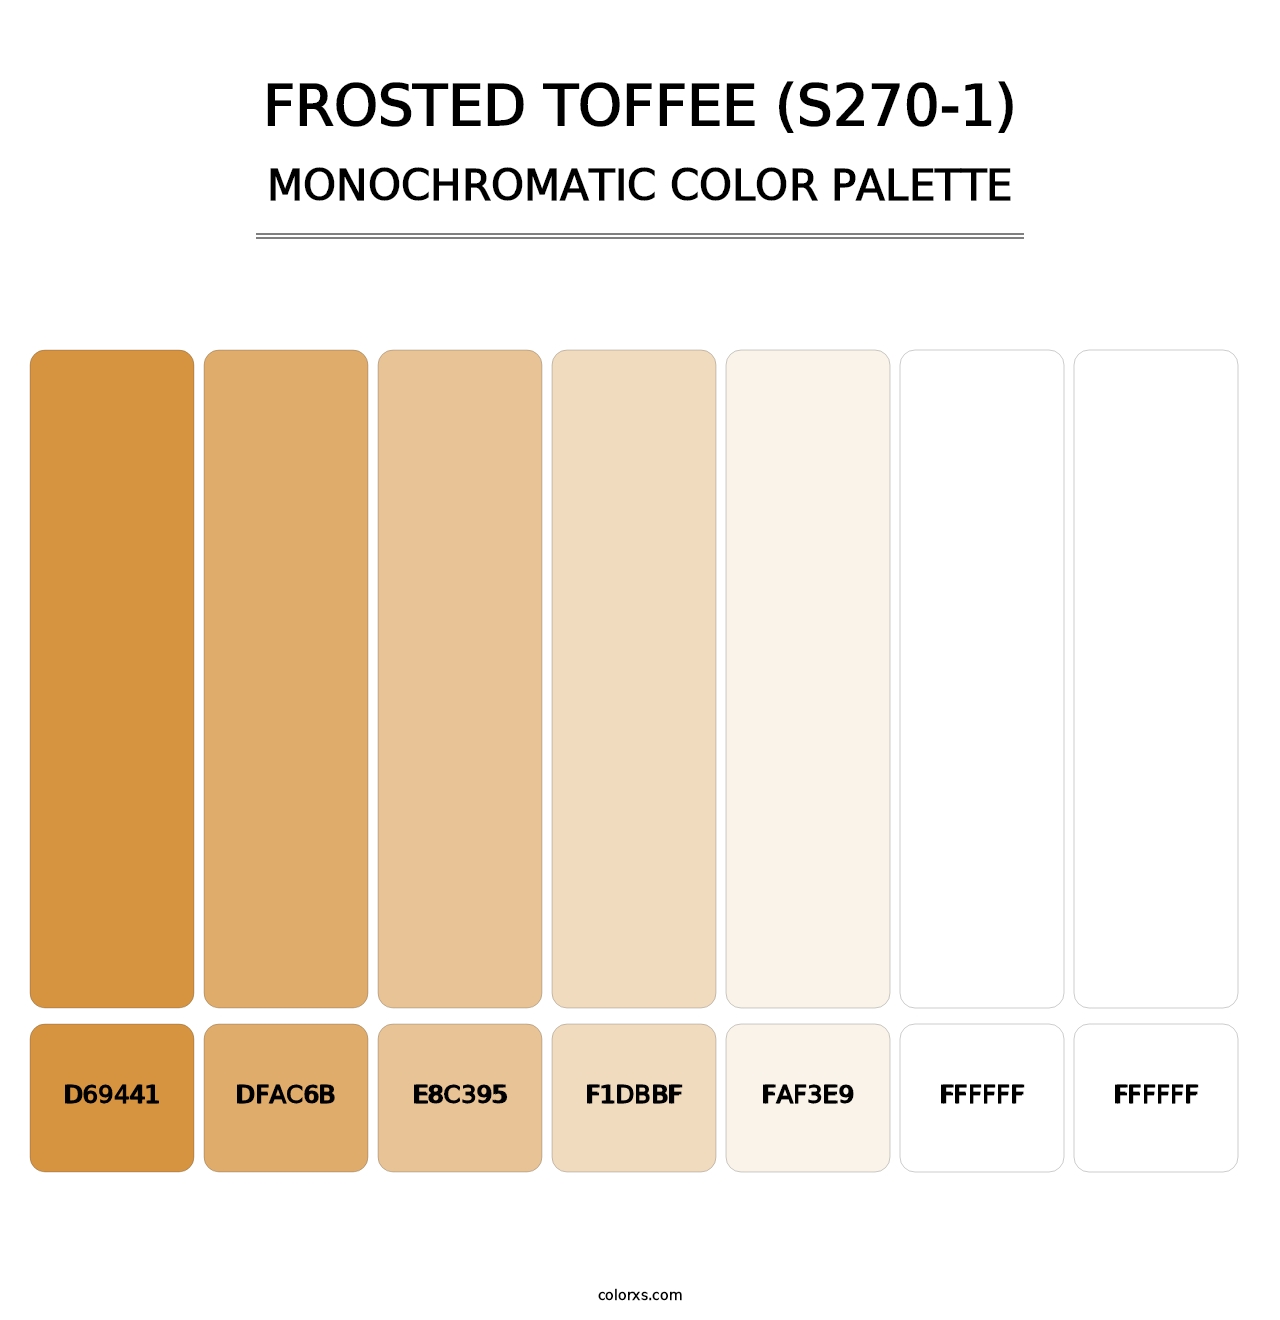 Frosted Toffee (S270-1) - Monochromatic Color Palette